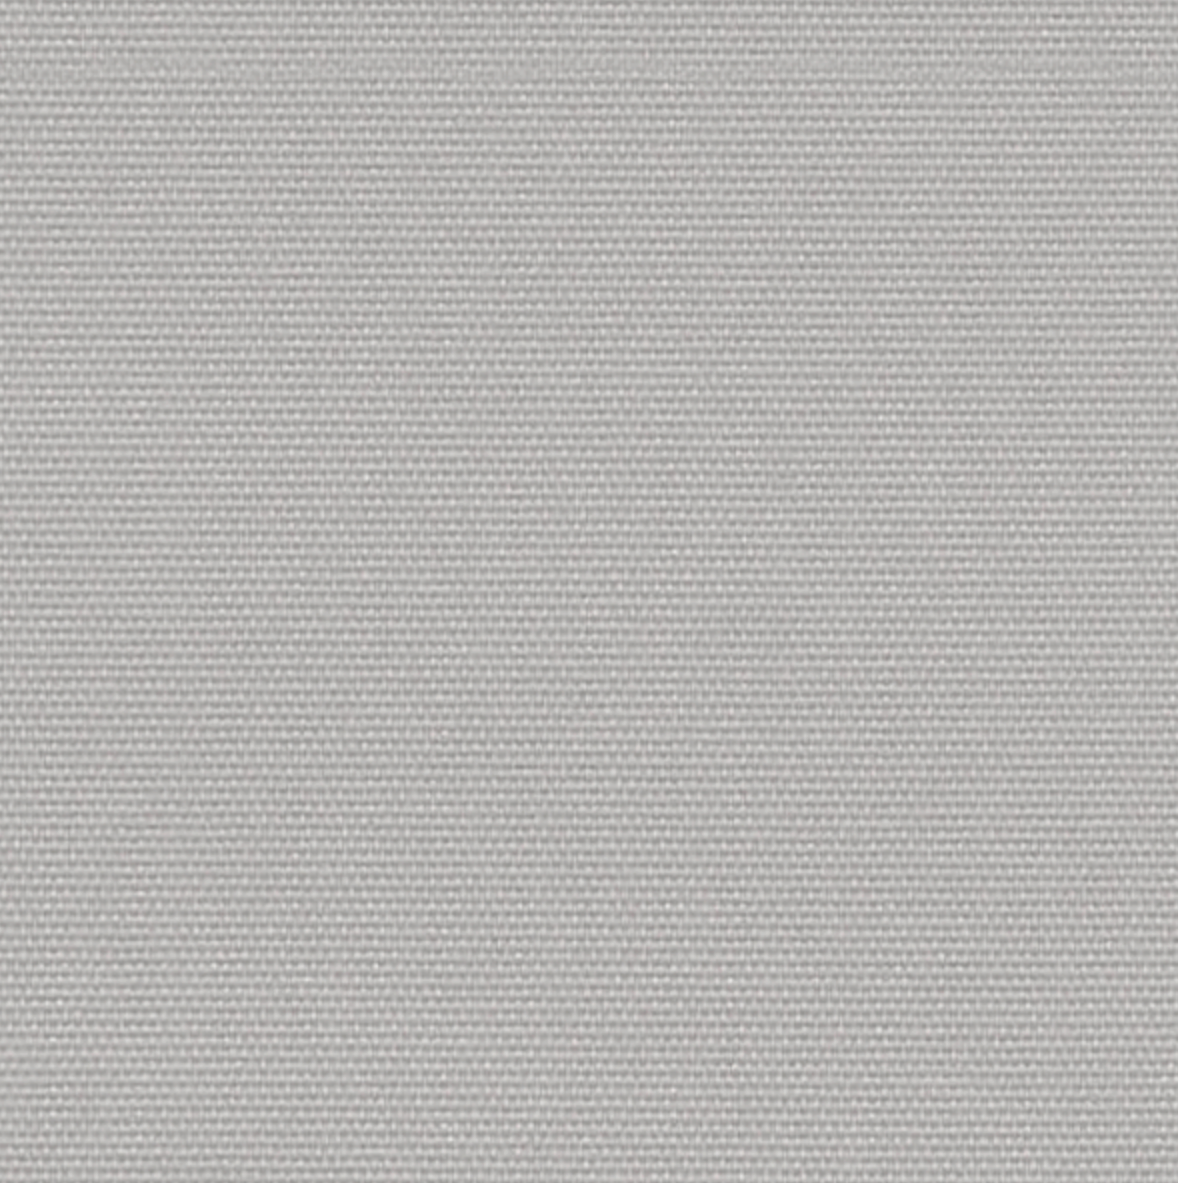 SURLAST OUTDOOR MARINE WATERPROOF FABRIC SILVER GREY 60" WIDE 7 OZS. BY THE YARD